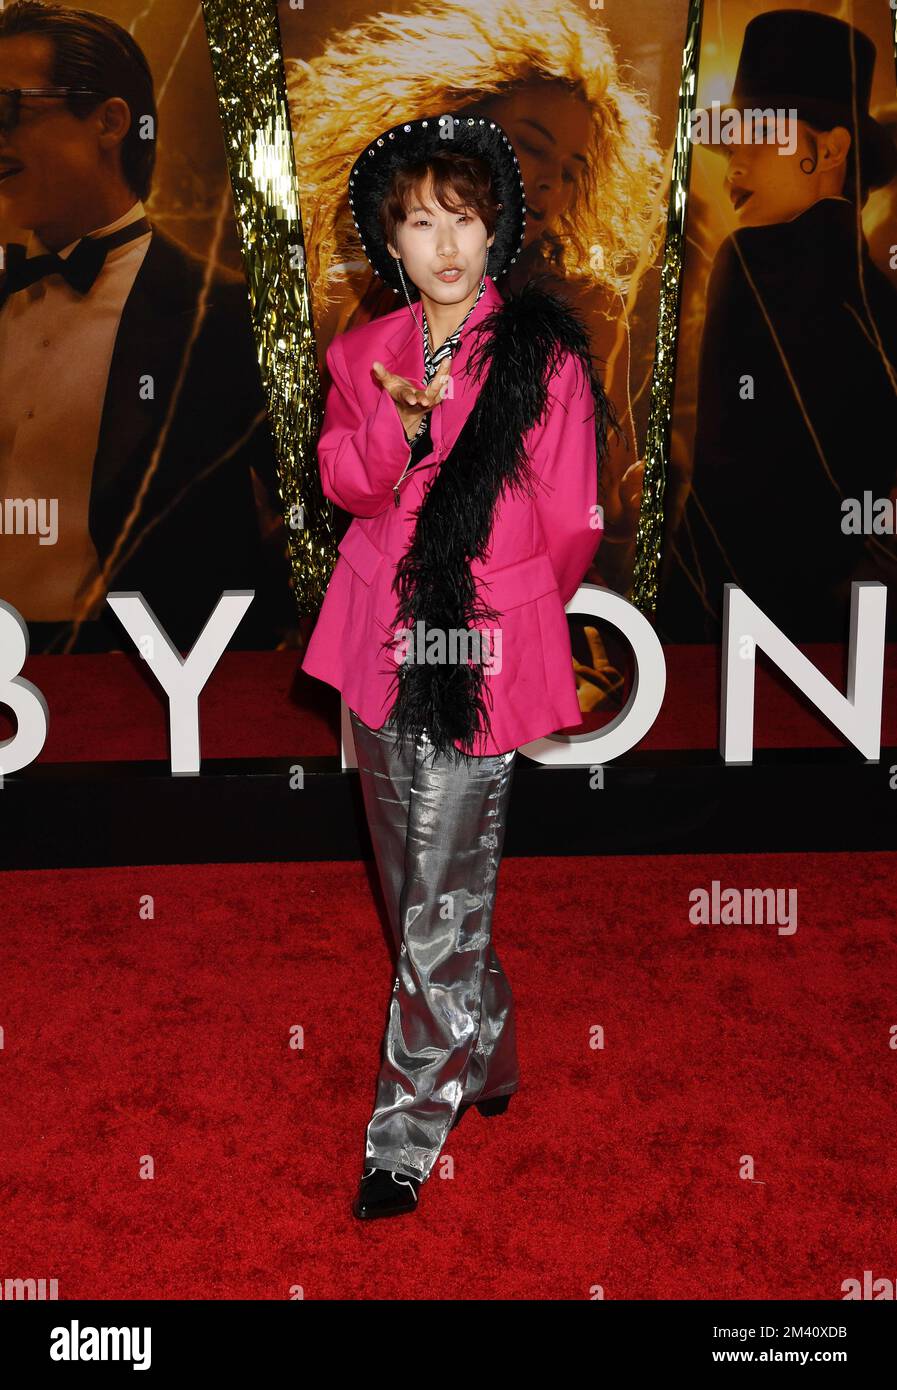 LOS ANGELES, CALIFORNIA - DECEMBER 15: Lee Eun-Jae attends the Global Premiere Screening of 'Babylon' at Academy Museum of Motion Pictures on December Stock Photo